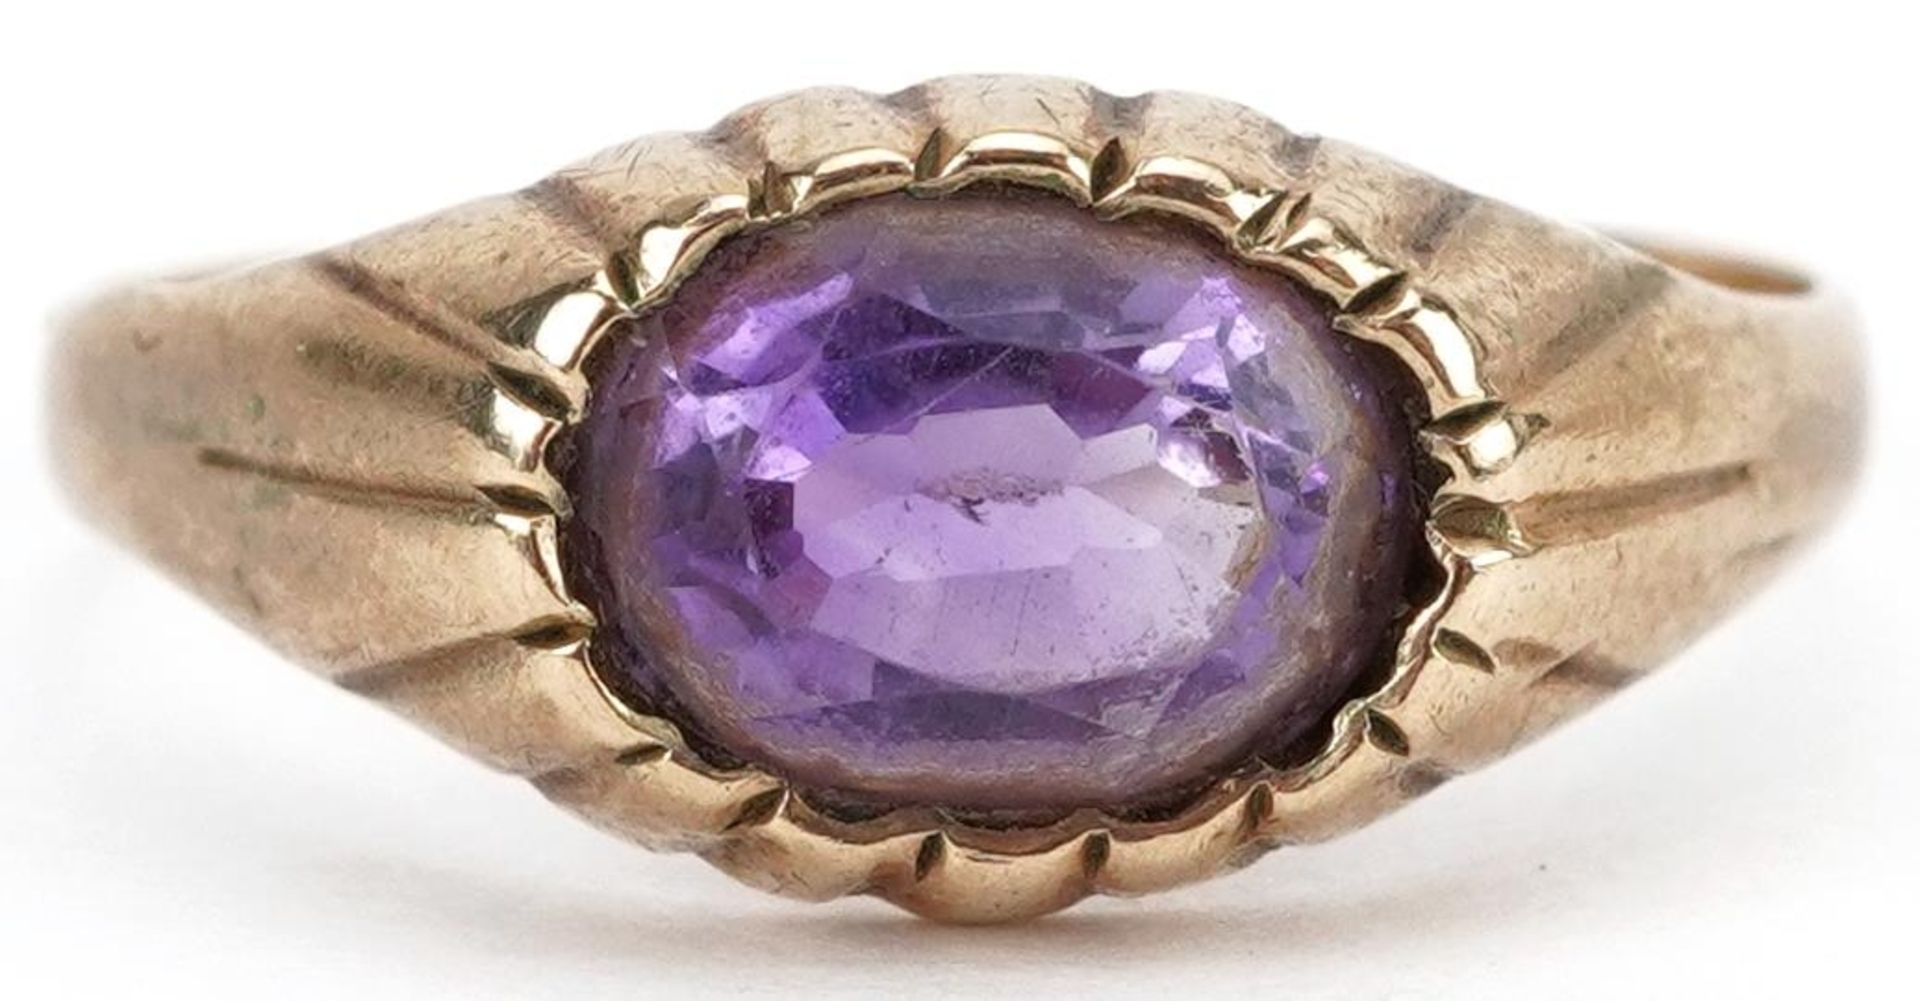 9ct gold oval amethyst ring with ornate setting, size K, 2.0g